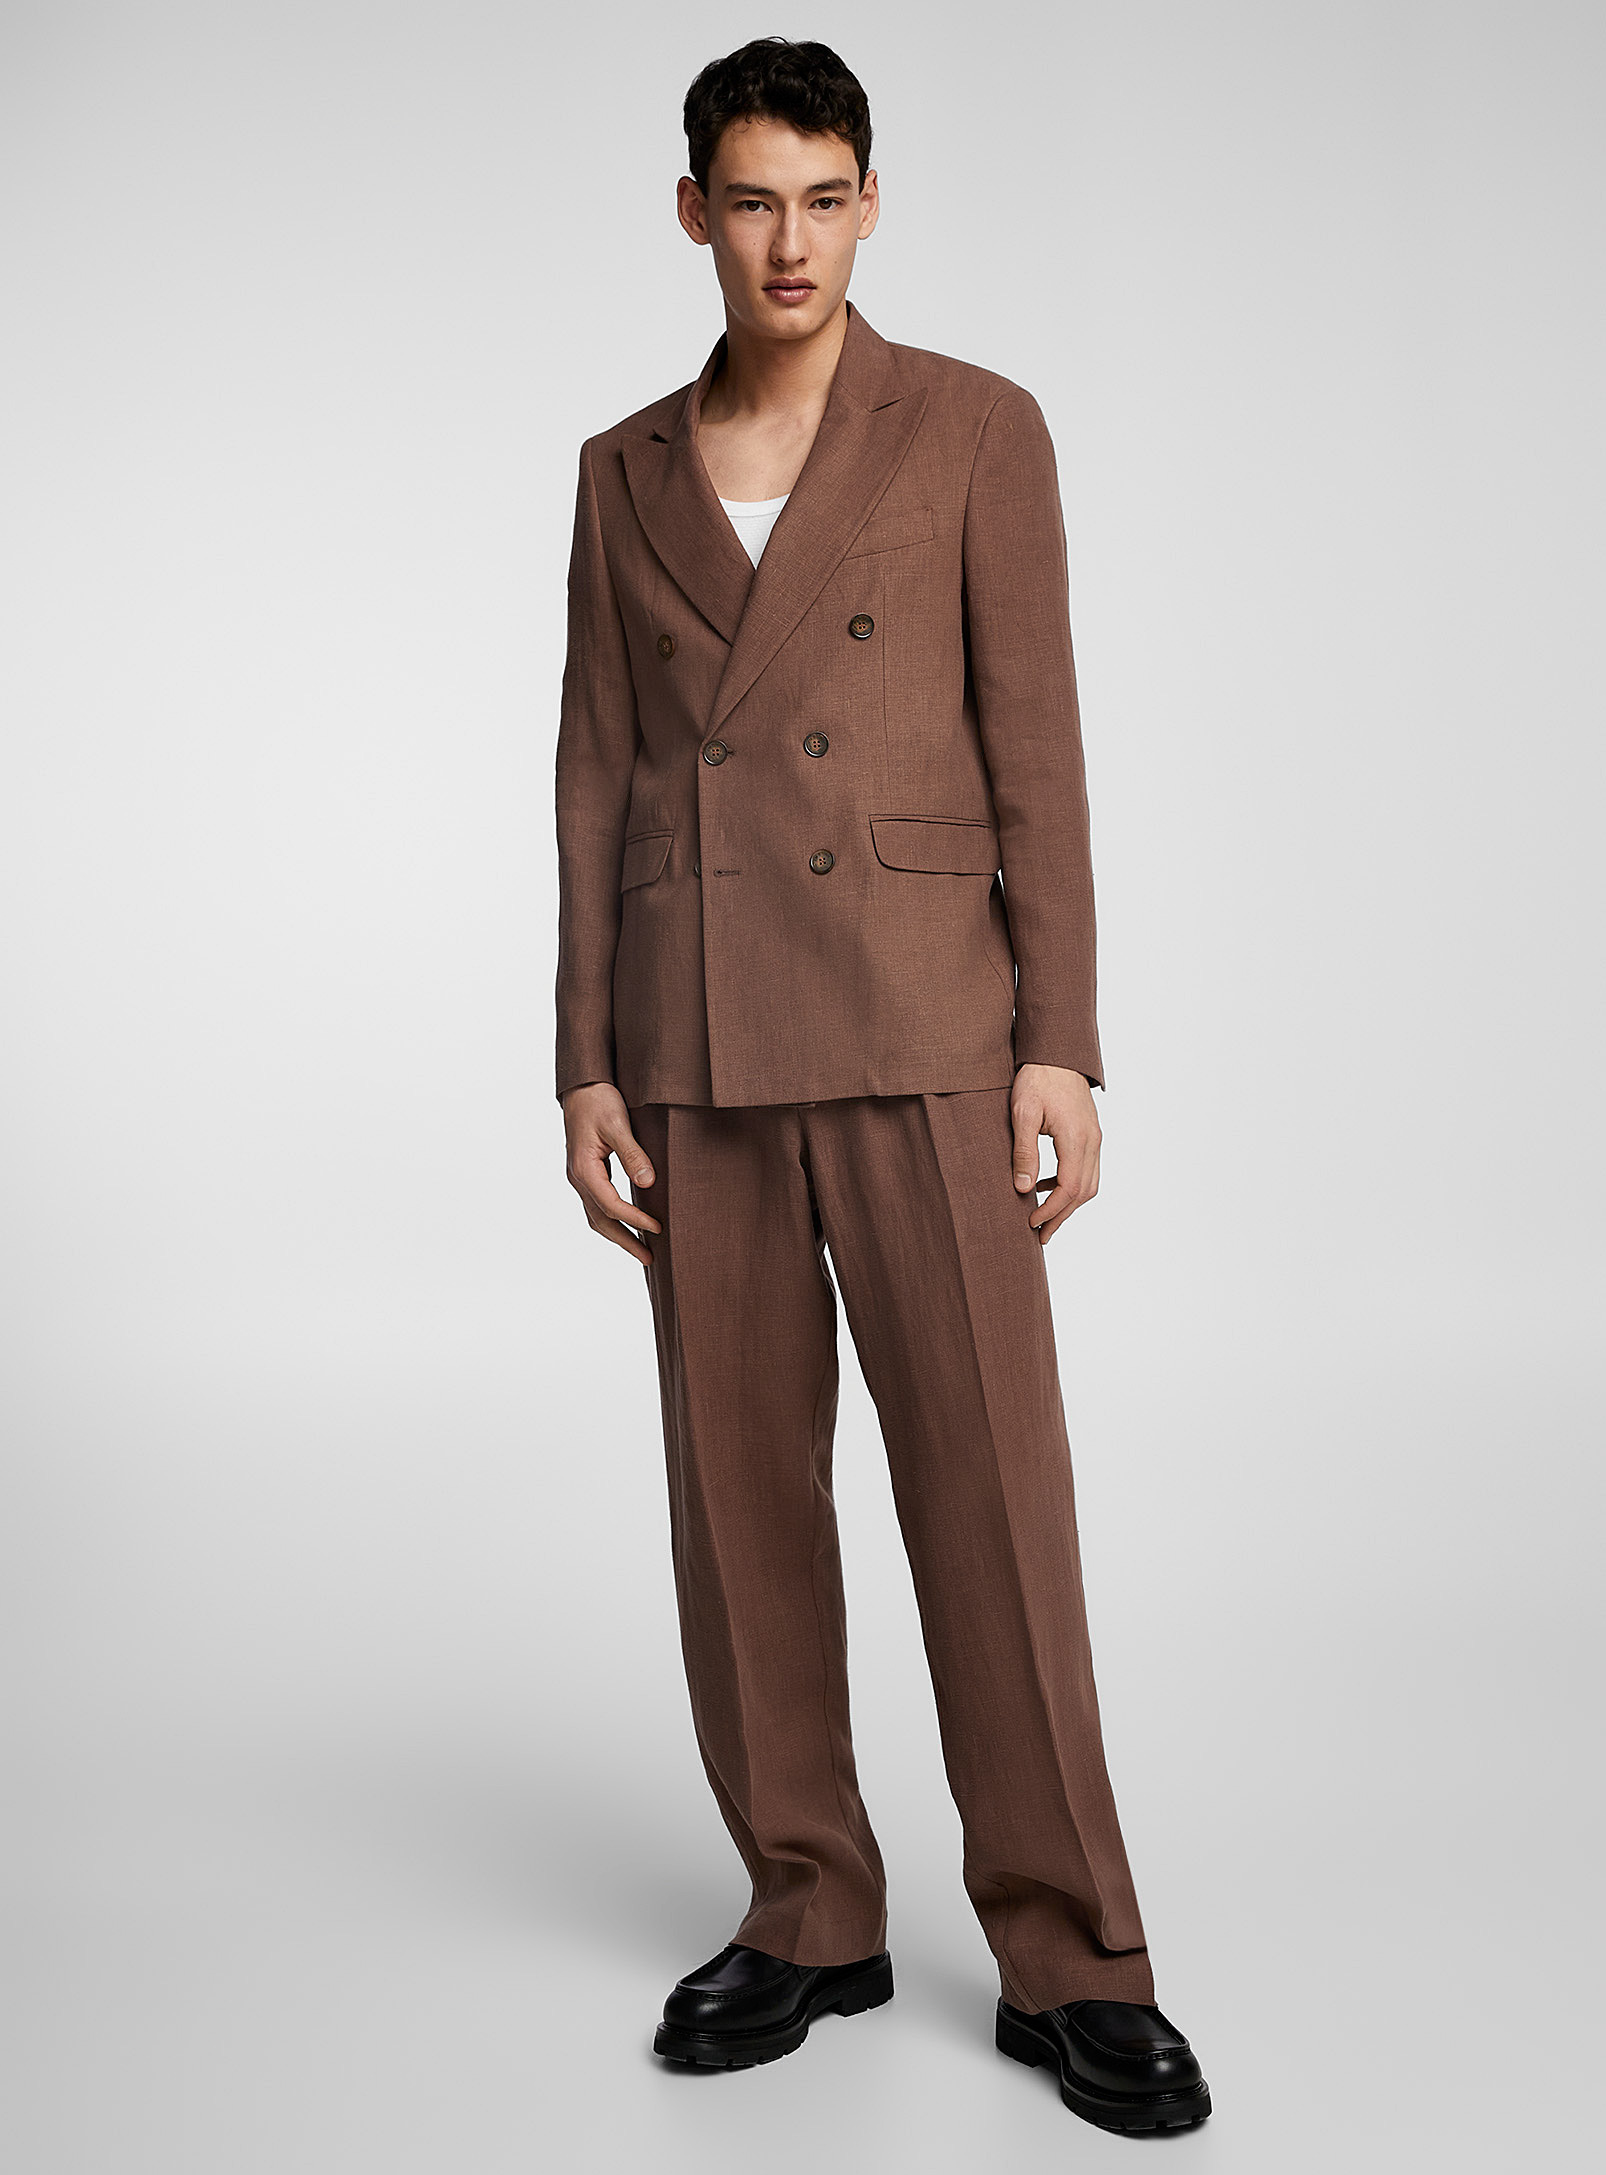 I'M BRIAN - Men's Brown pure linen pleated pant